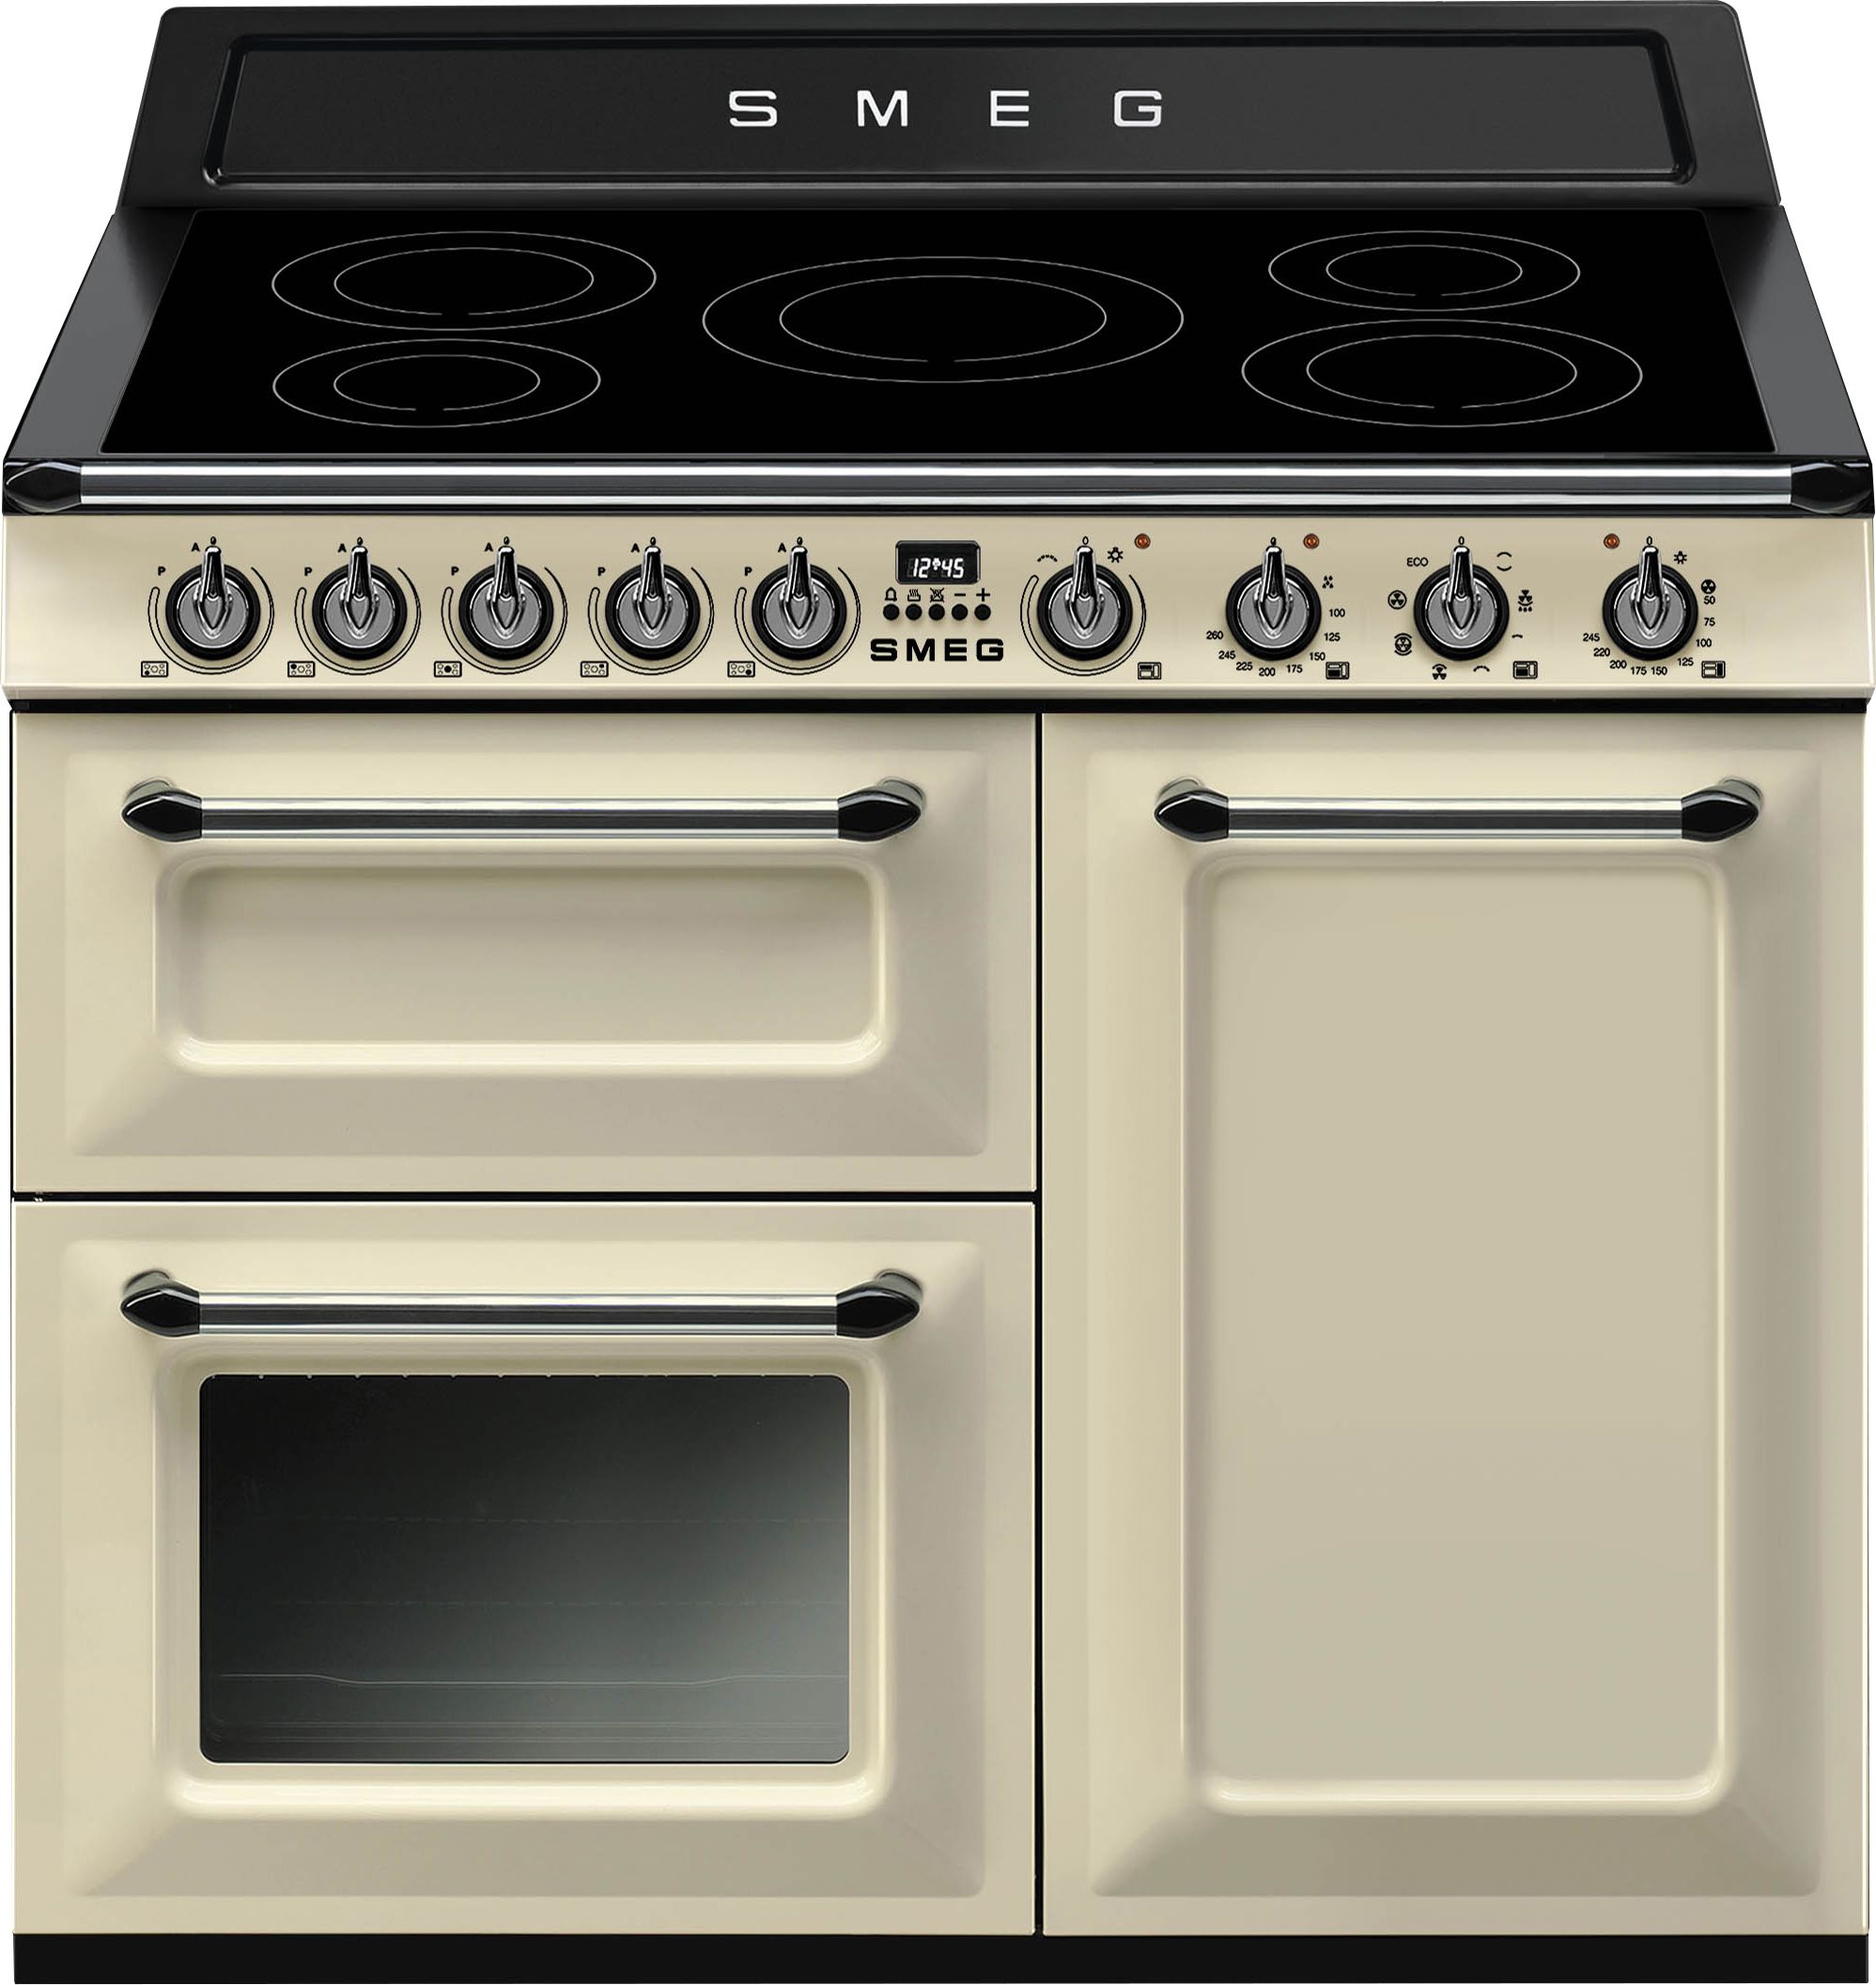 Smeg Victoria TR103IP2 100cm Electric Range Cooker with Induction Hob - Cream - A/B Rated, Cream